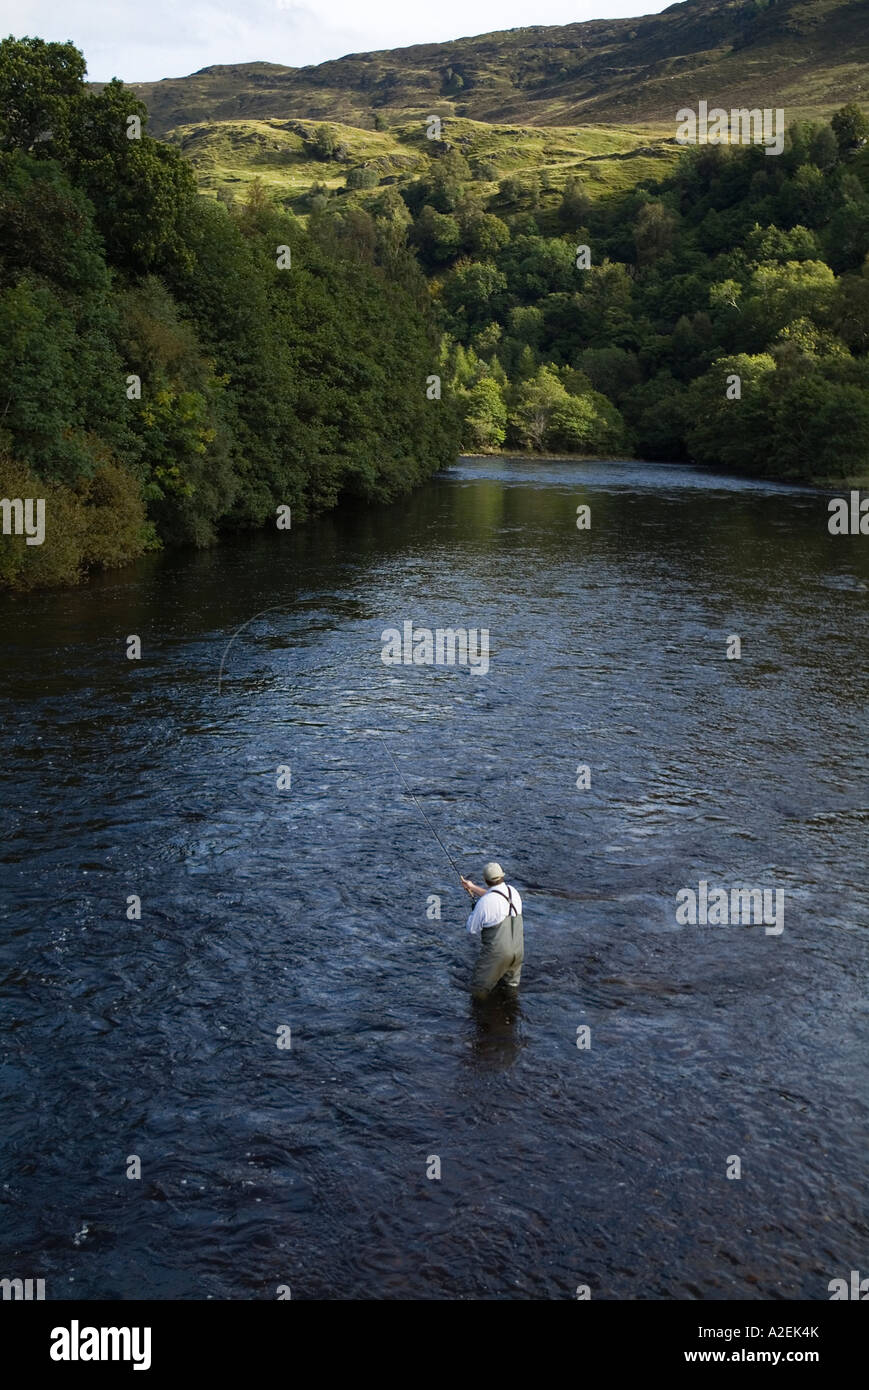 dh River Lyon GLEN LYON PERTHSHIRE Fisherman waders standing in water flyfish angling angler casting reel fish rod scotland fly fishing Stock Photo